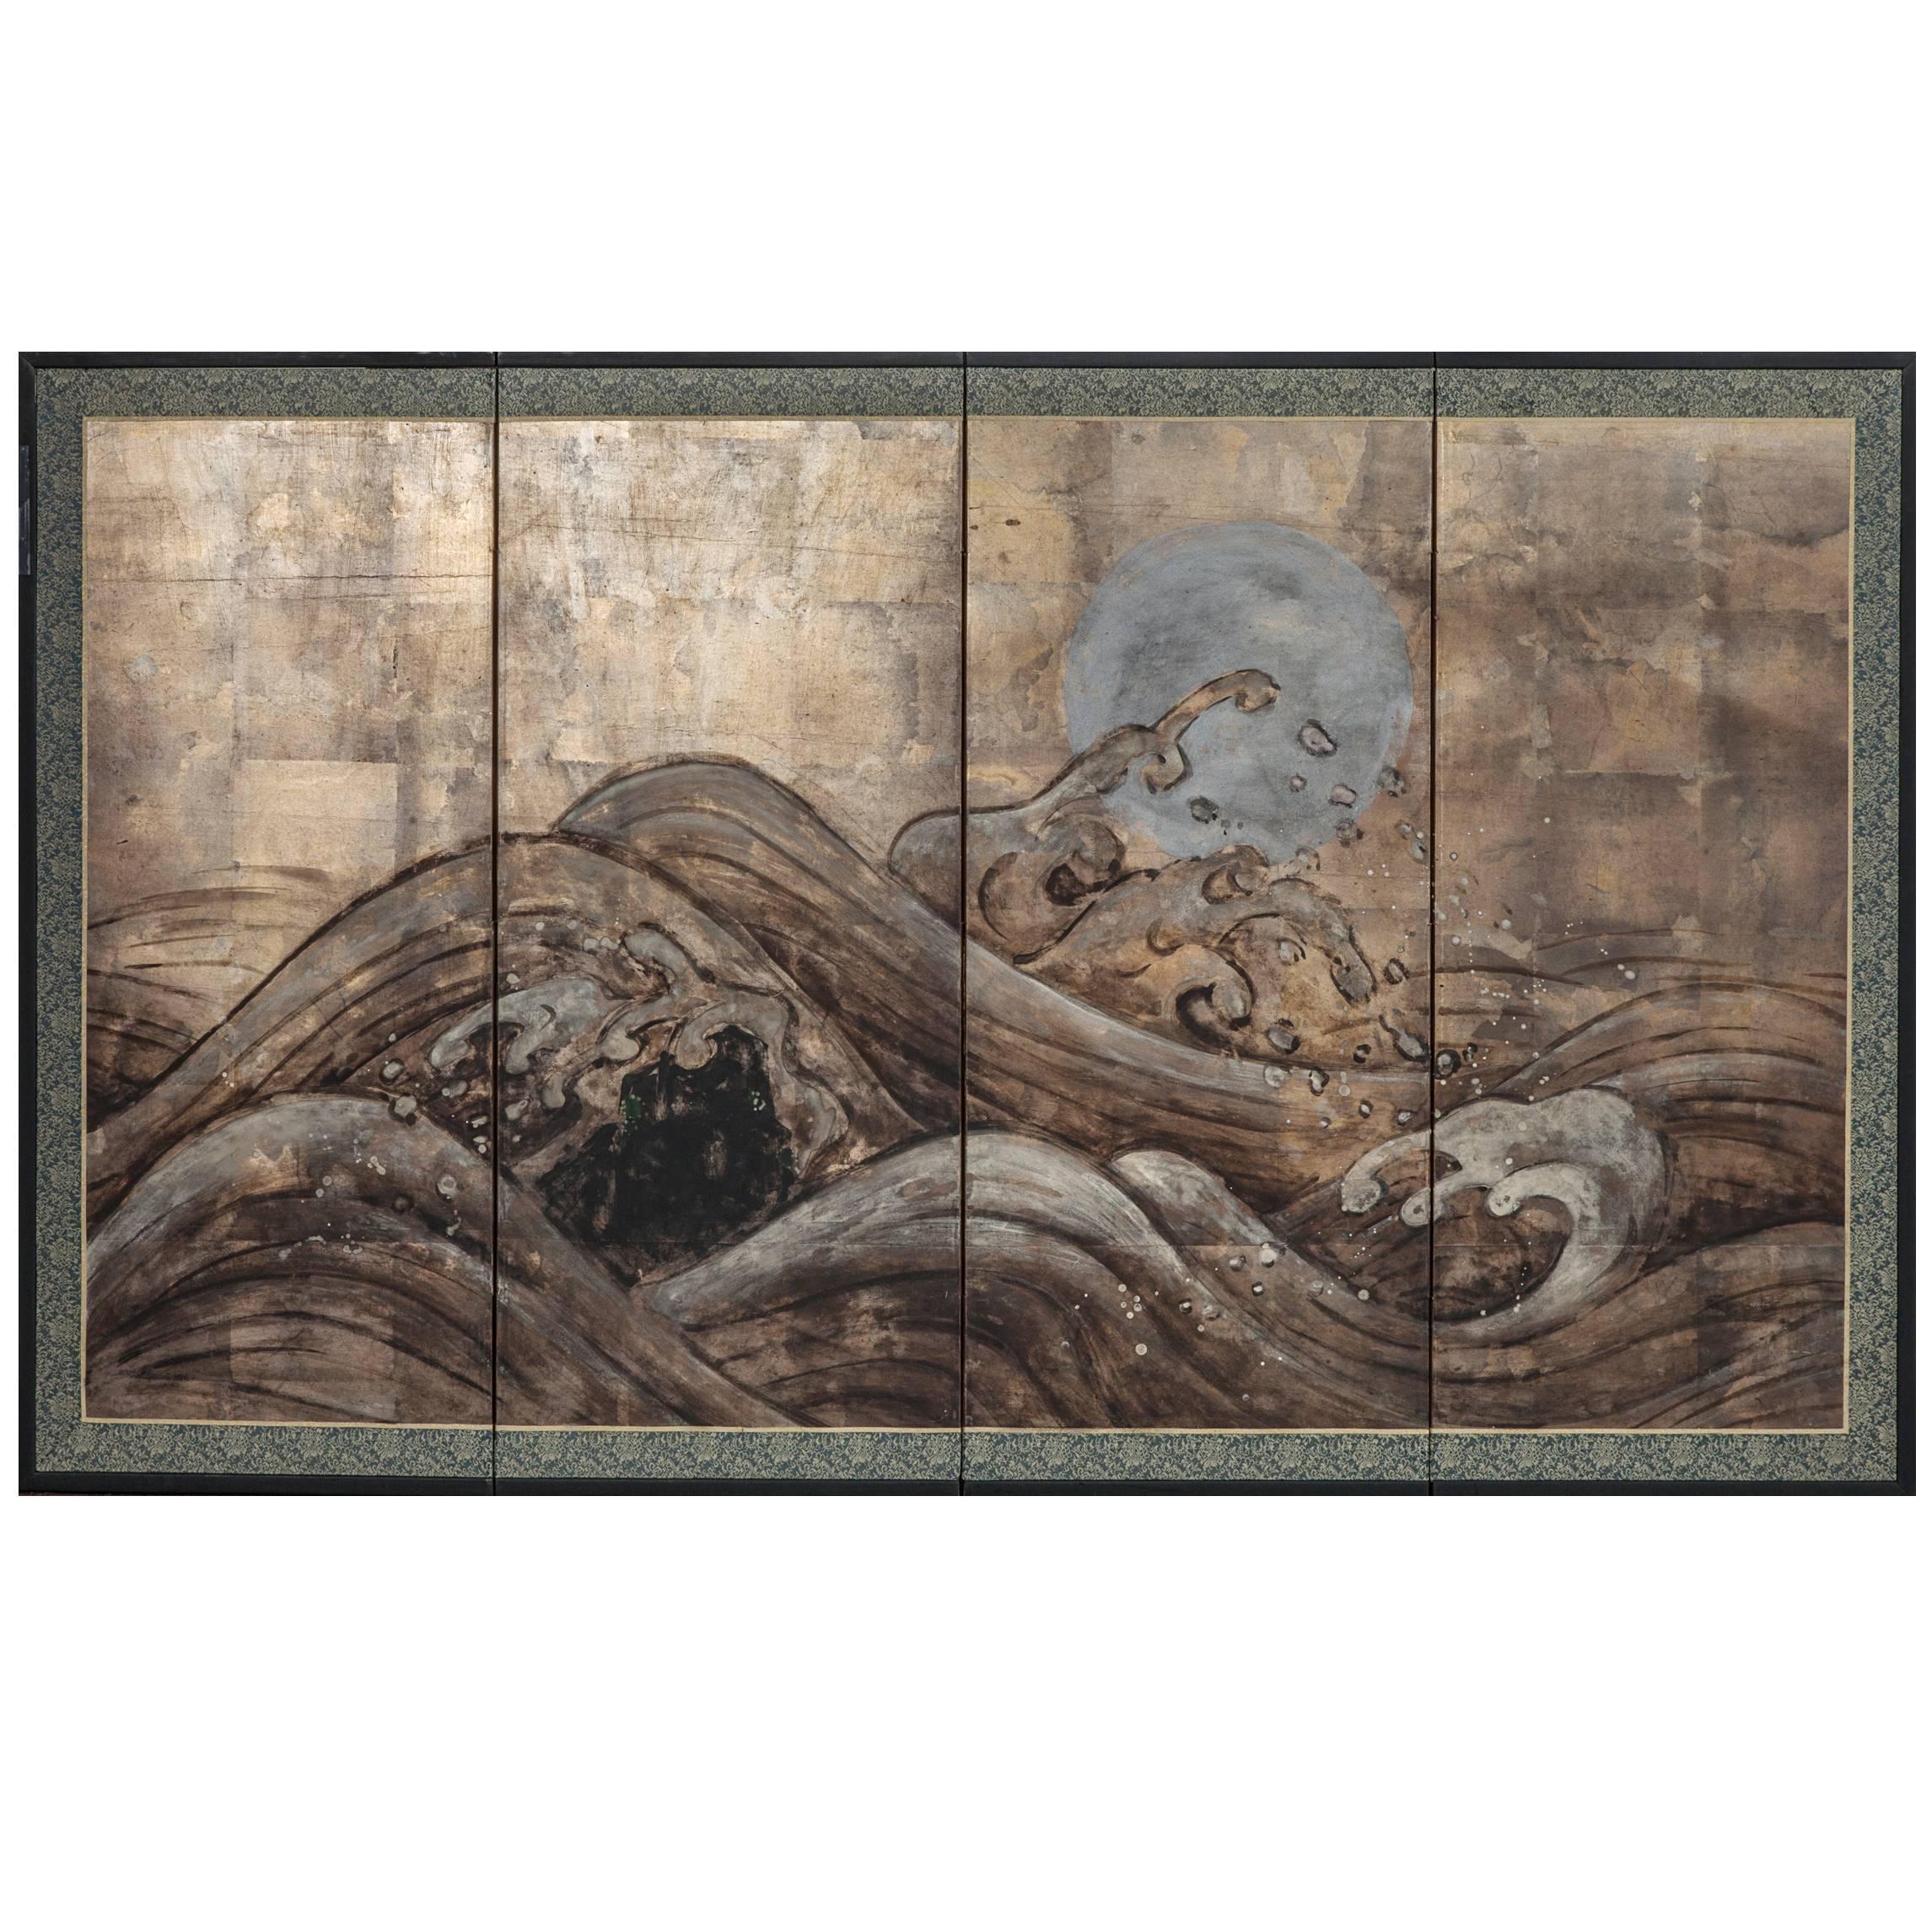 Japanese Four-Panel Screen "Ocean Wave and Silver Moon on Silver"